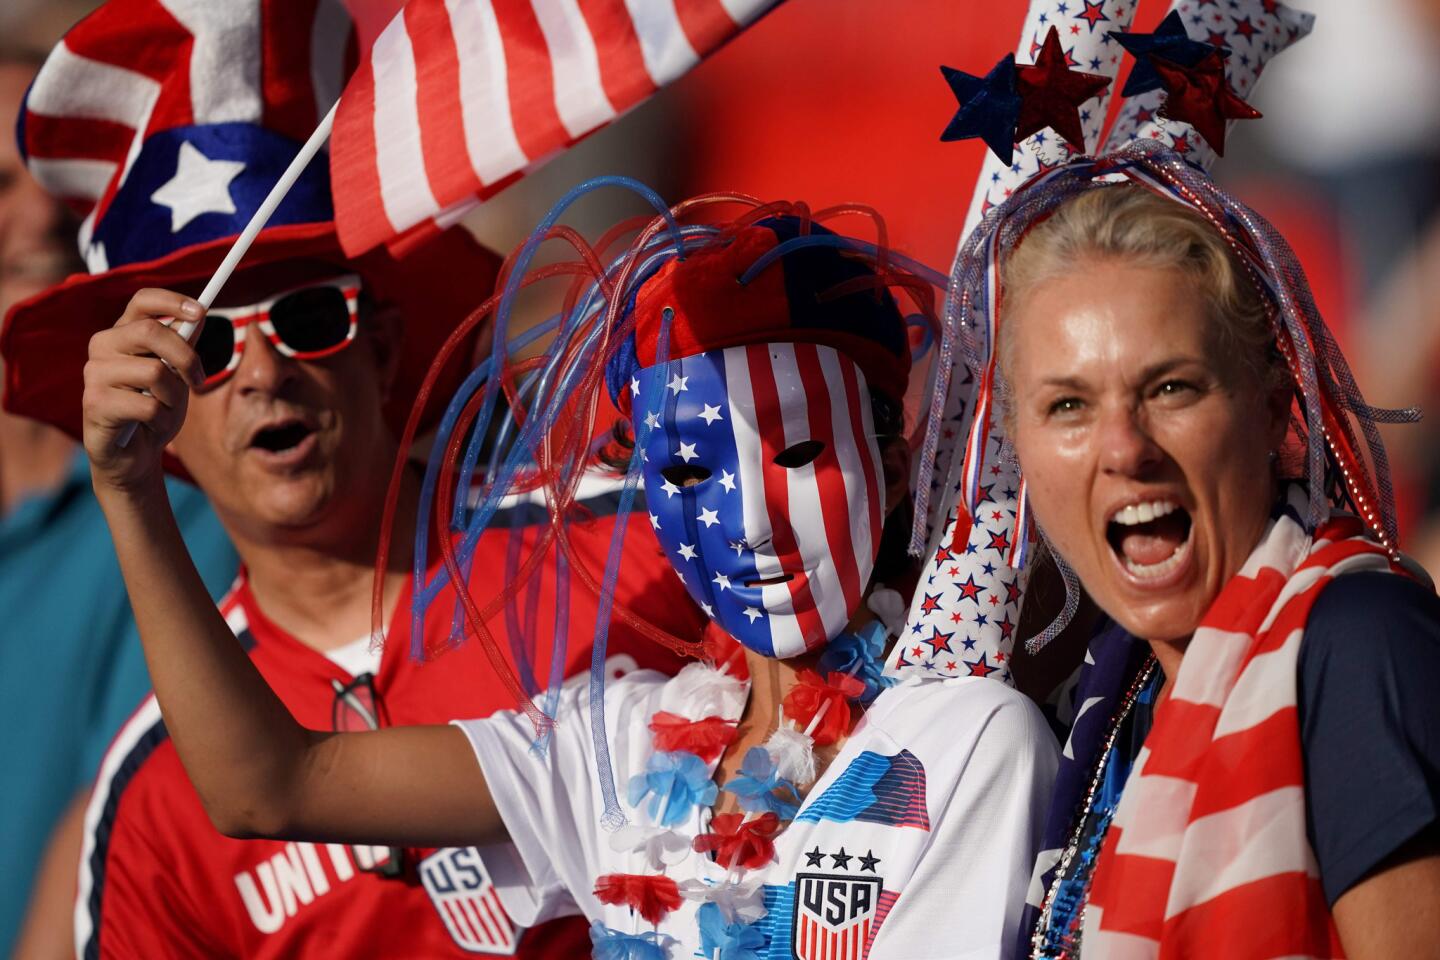 U.S. fans show their support before the start of the United States' Women's World Cup quarterfinal match against France in Paris on June 28.